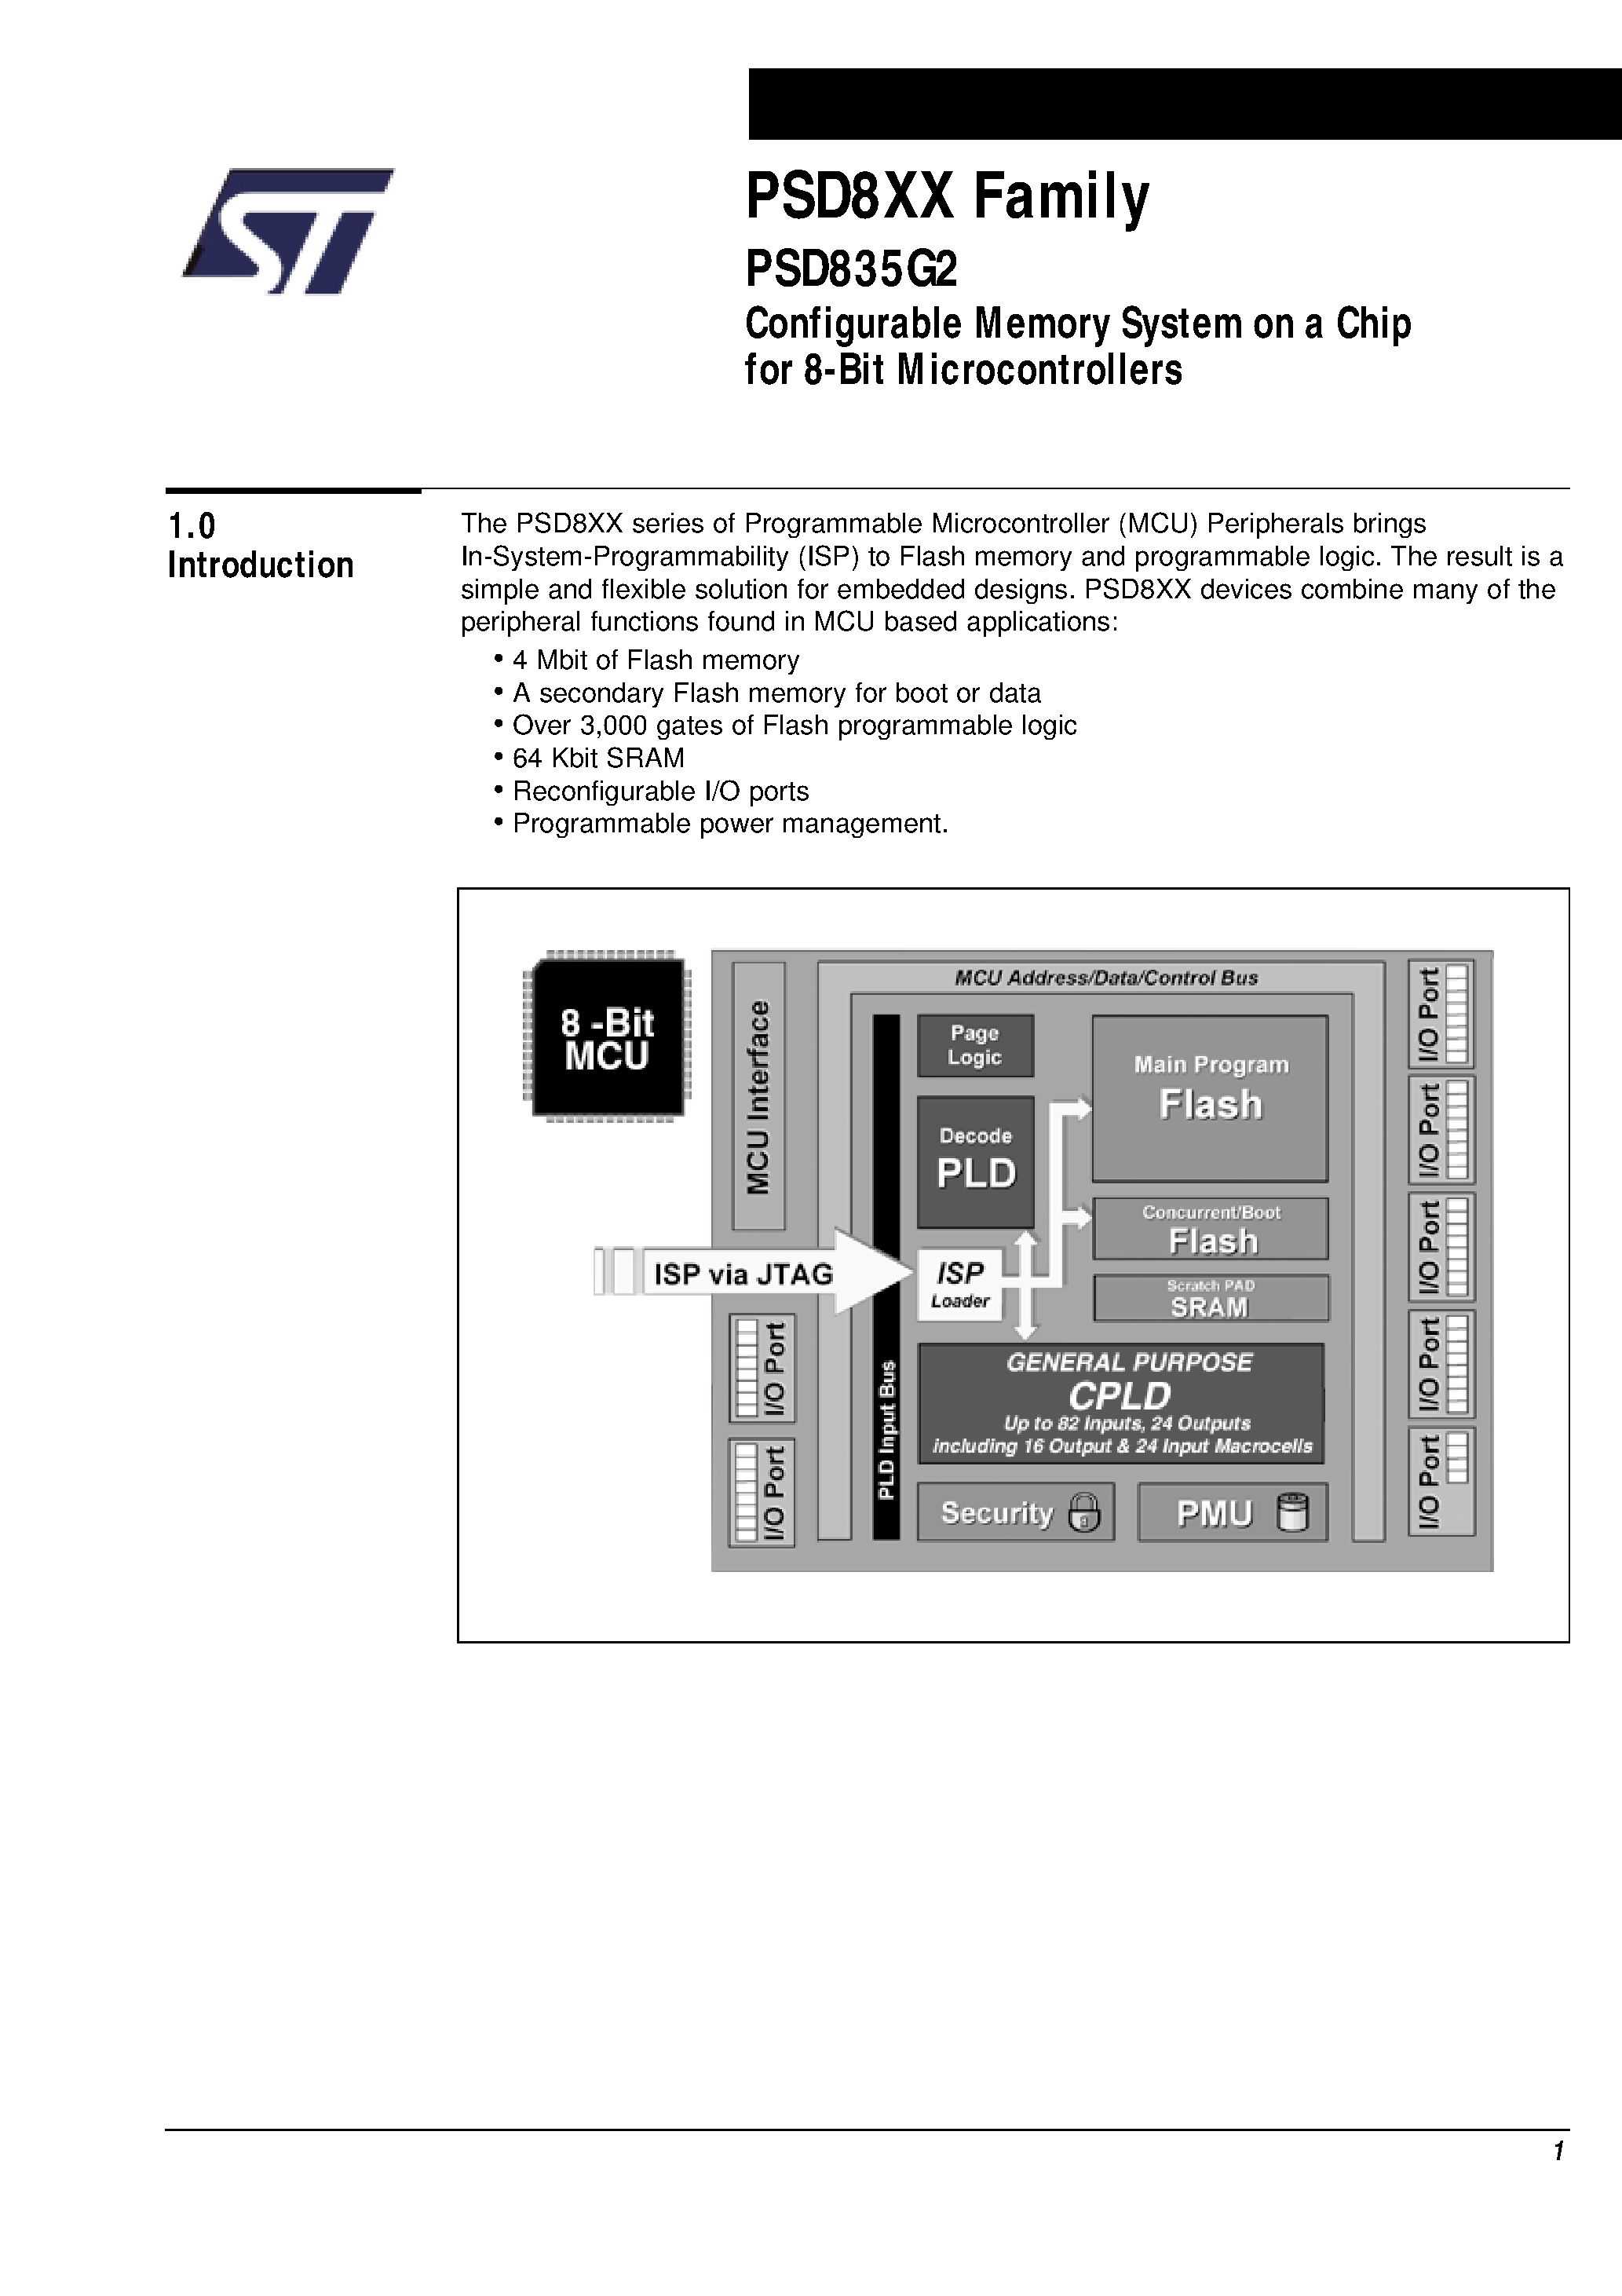 Datasheet PSD835F2V-A-90J - Configurable Memory System on a Chip for 8-Bit Microcontrollers page 2